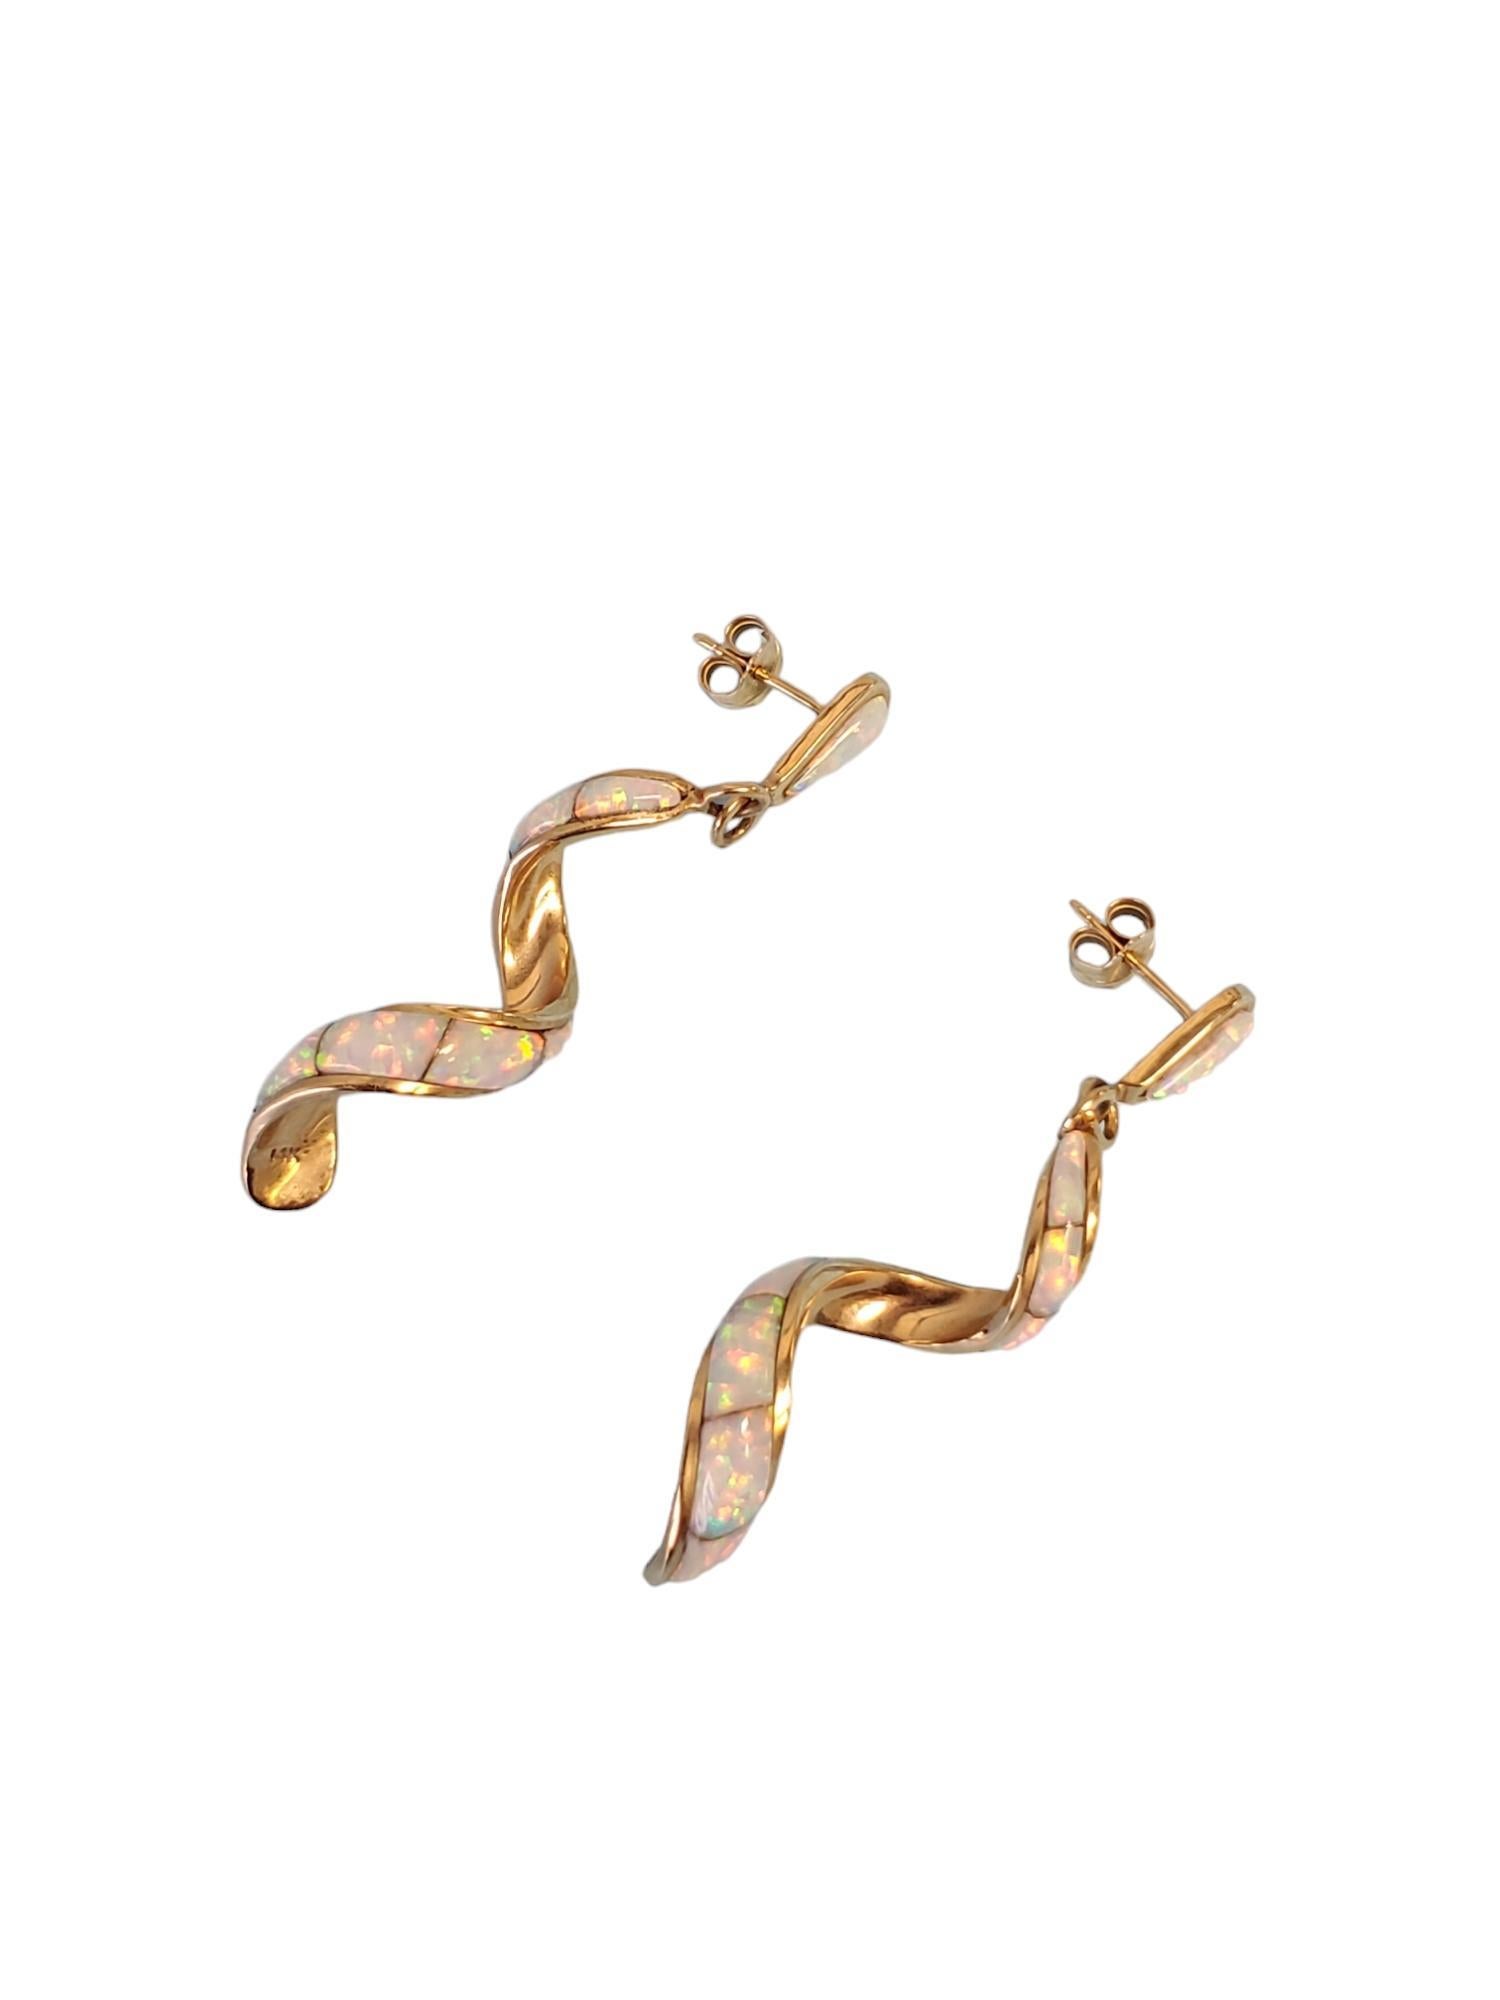 Listed are two fabulous 14k yellow gold white opal inlay spiral drop earrings. They are approximately 1.7